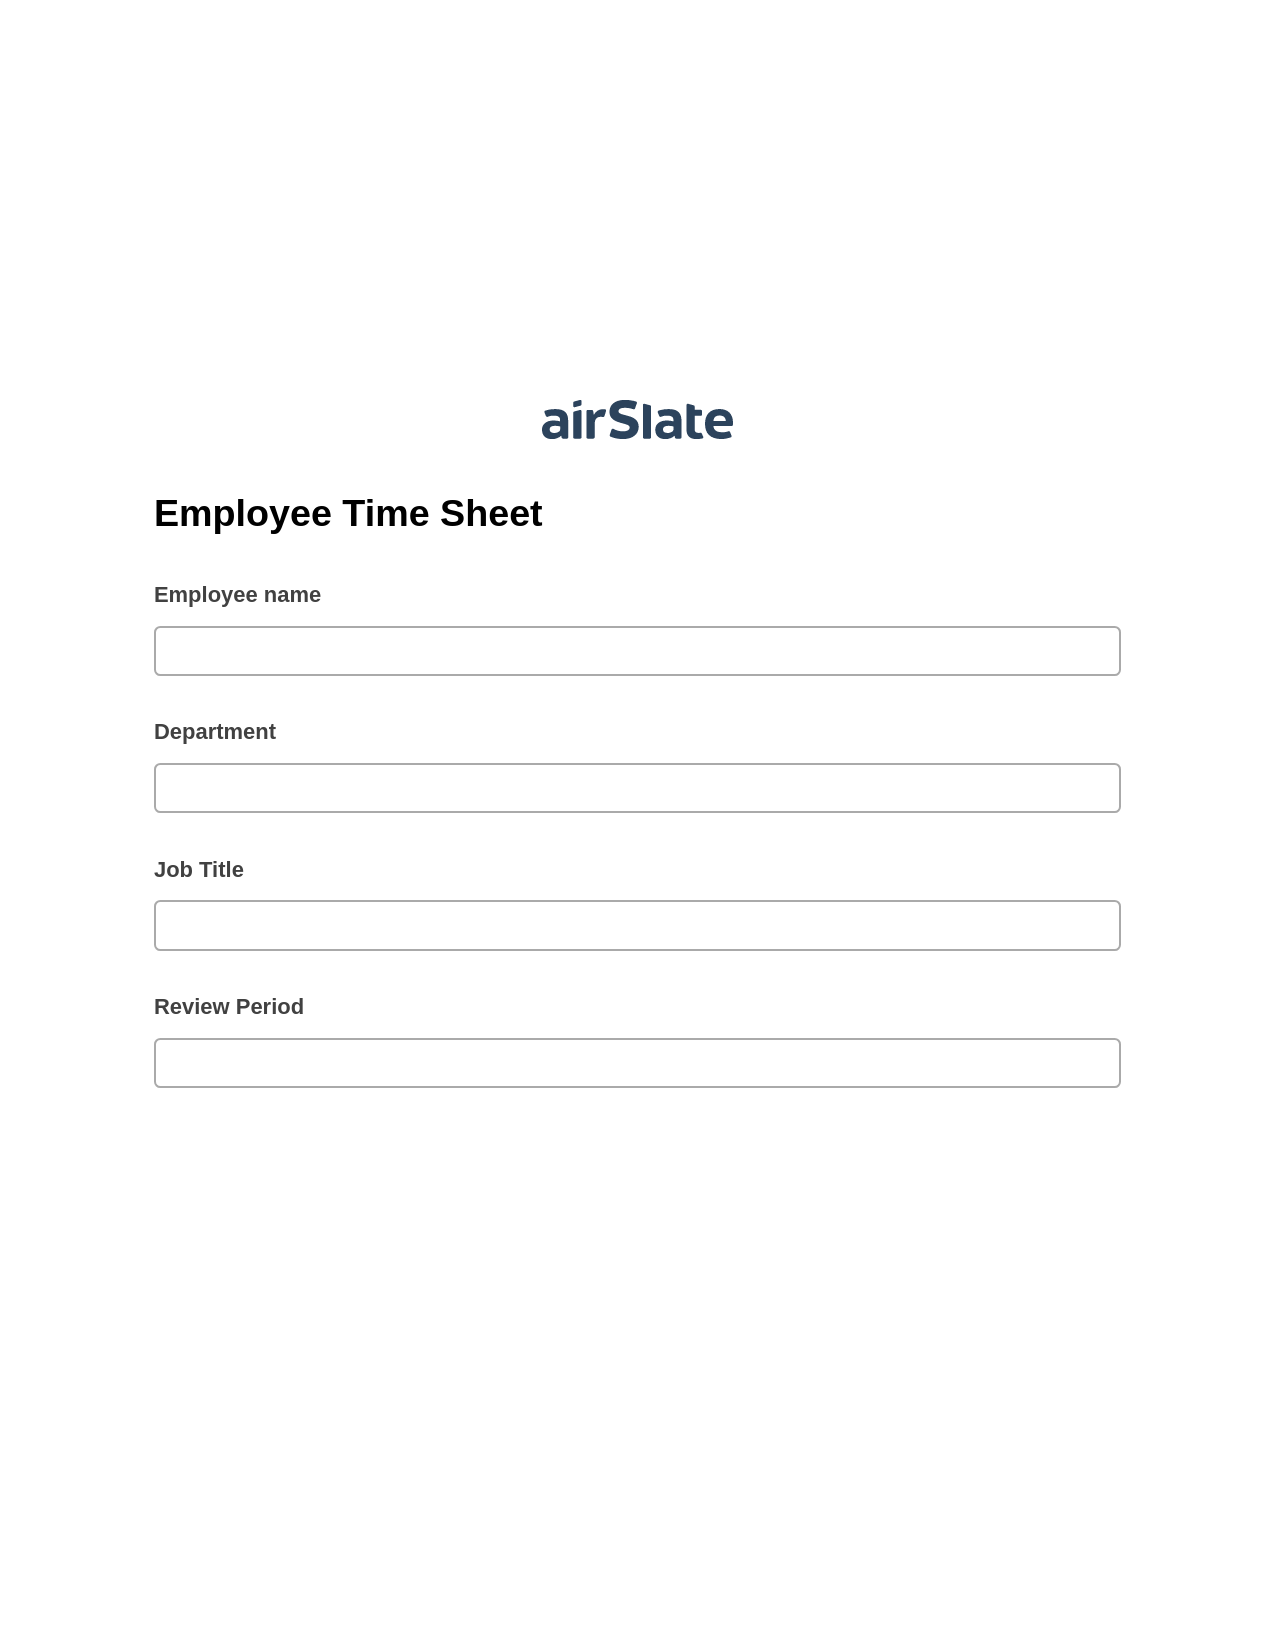 Employee Time Sheet Pre-fill from CSV File Bot, Rename Slate Bot, Archive to OneDrive Bot